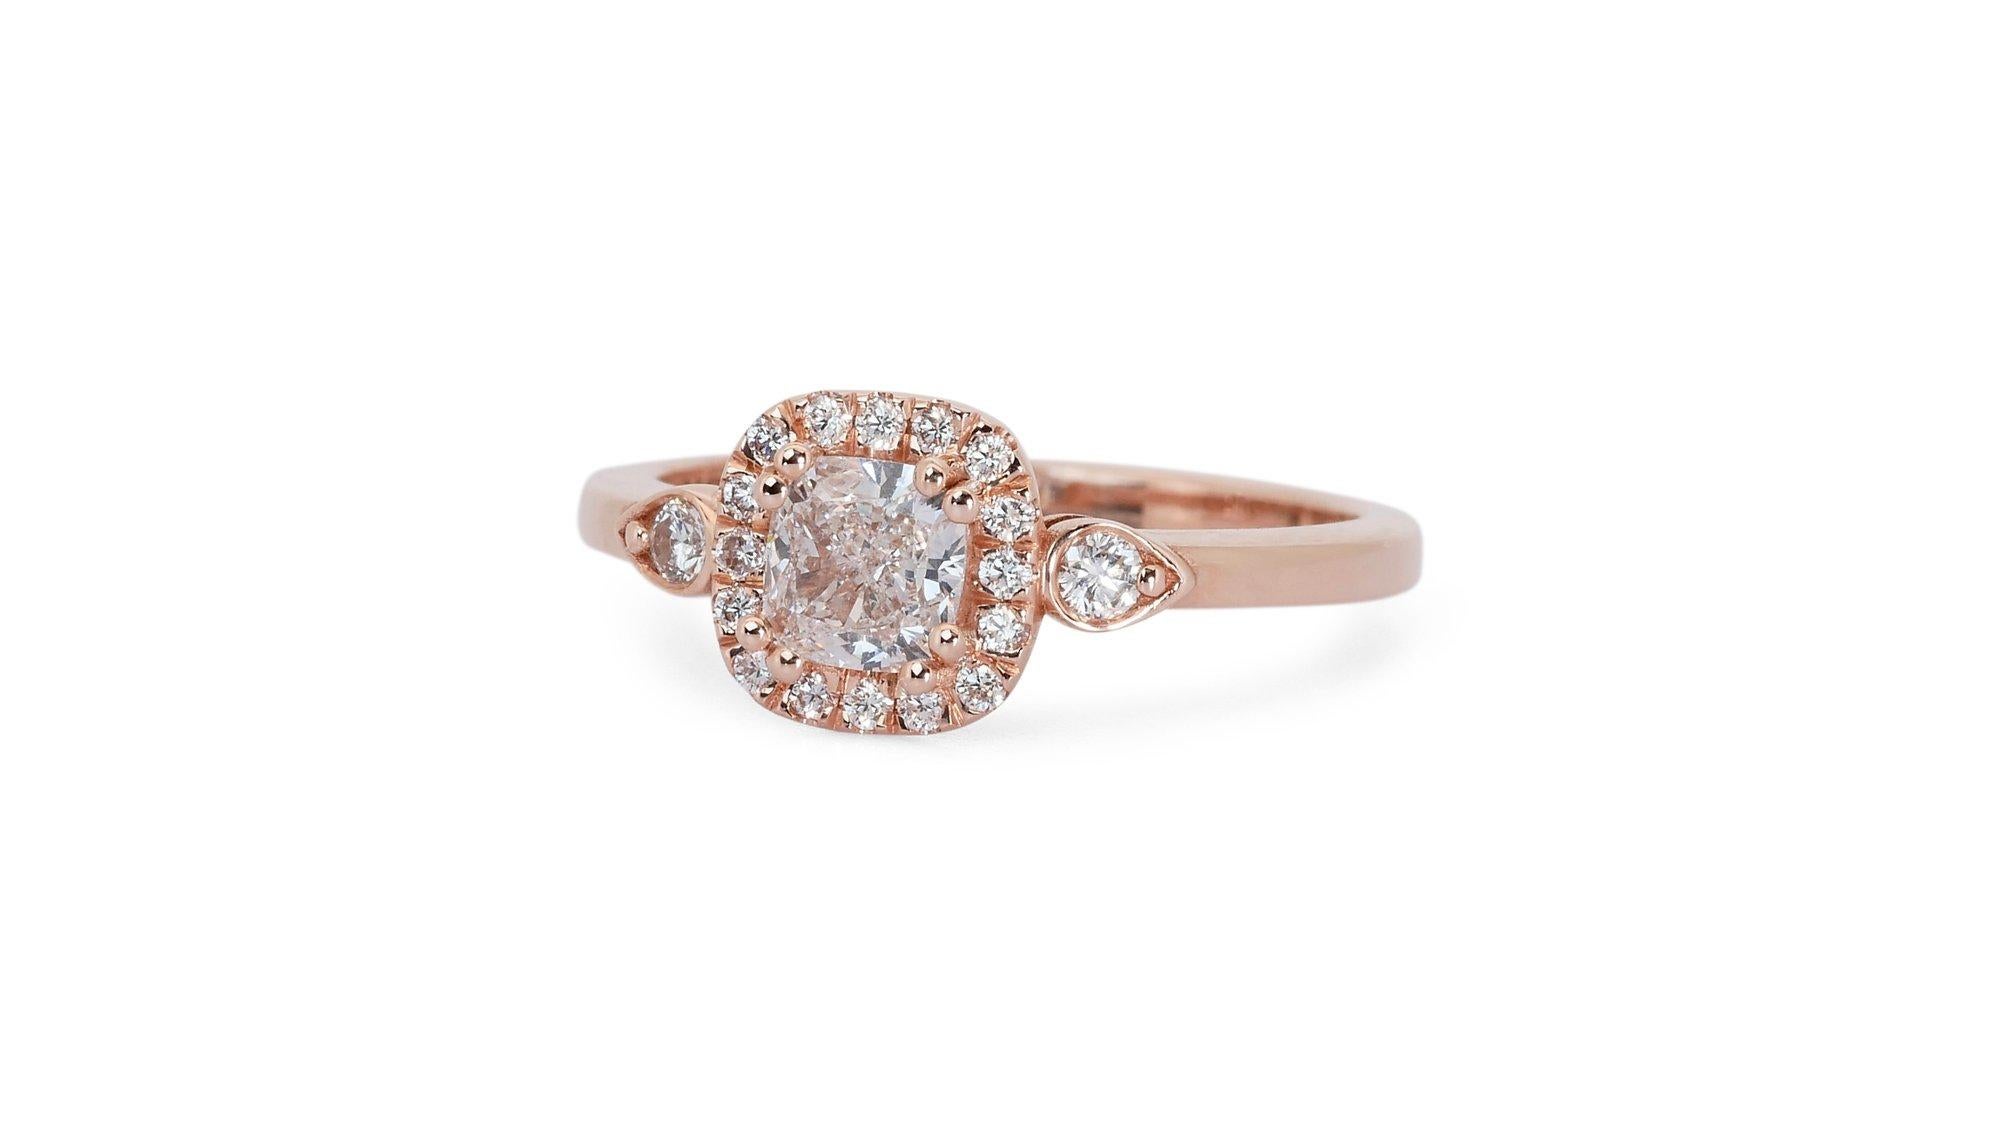 Cushion Cut Dazzling 1.10ct Diamonds Halo Ring in 18k Rose Gold - GIA Certified For Sale